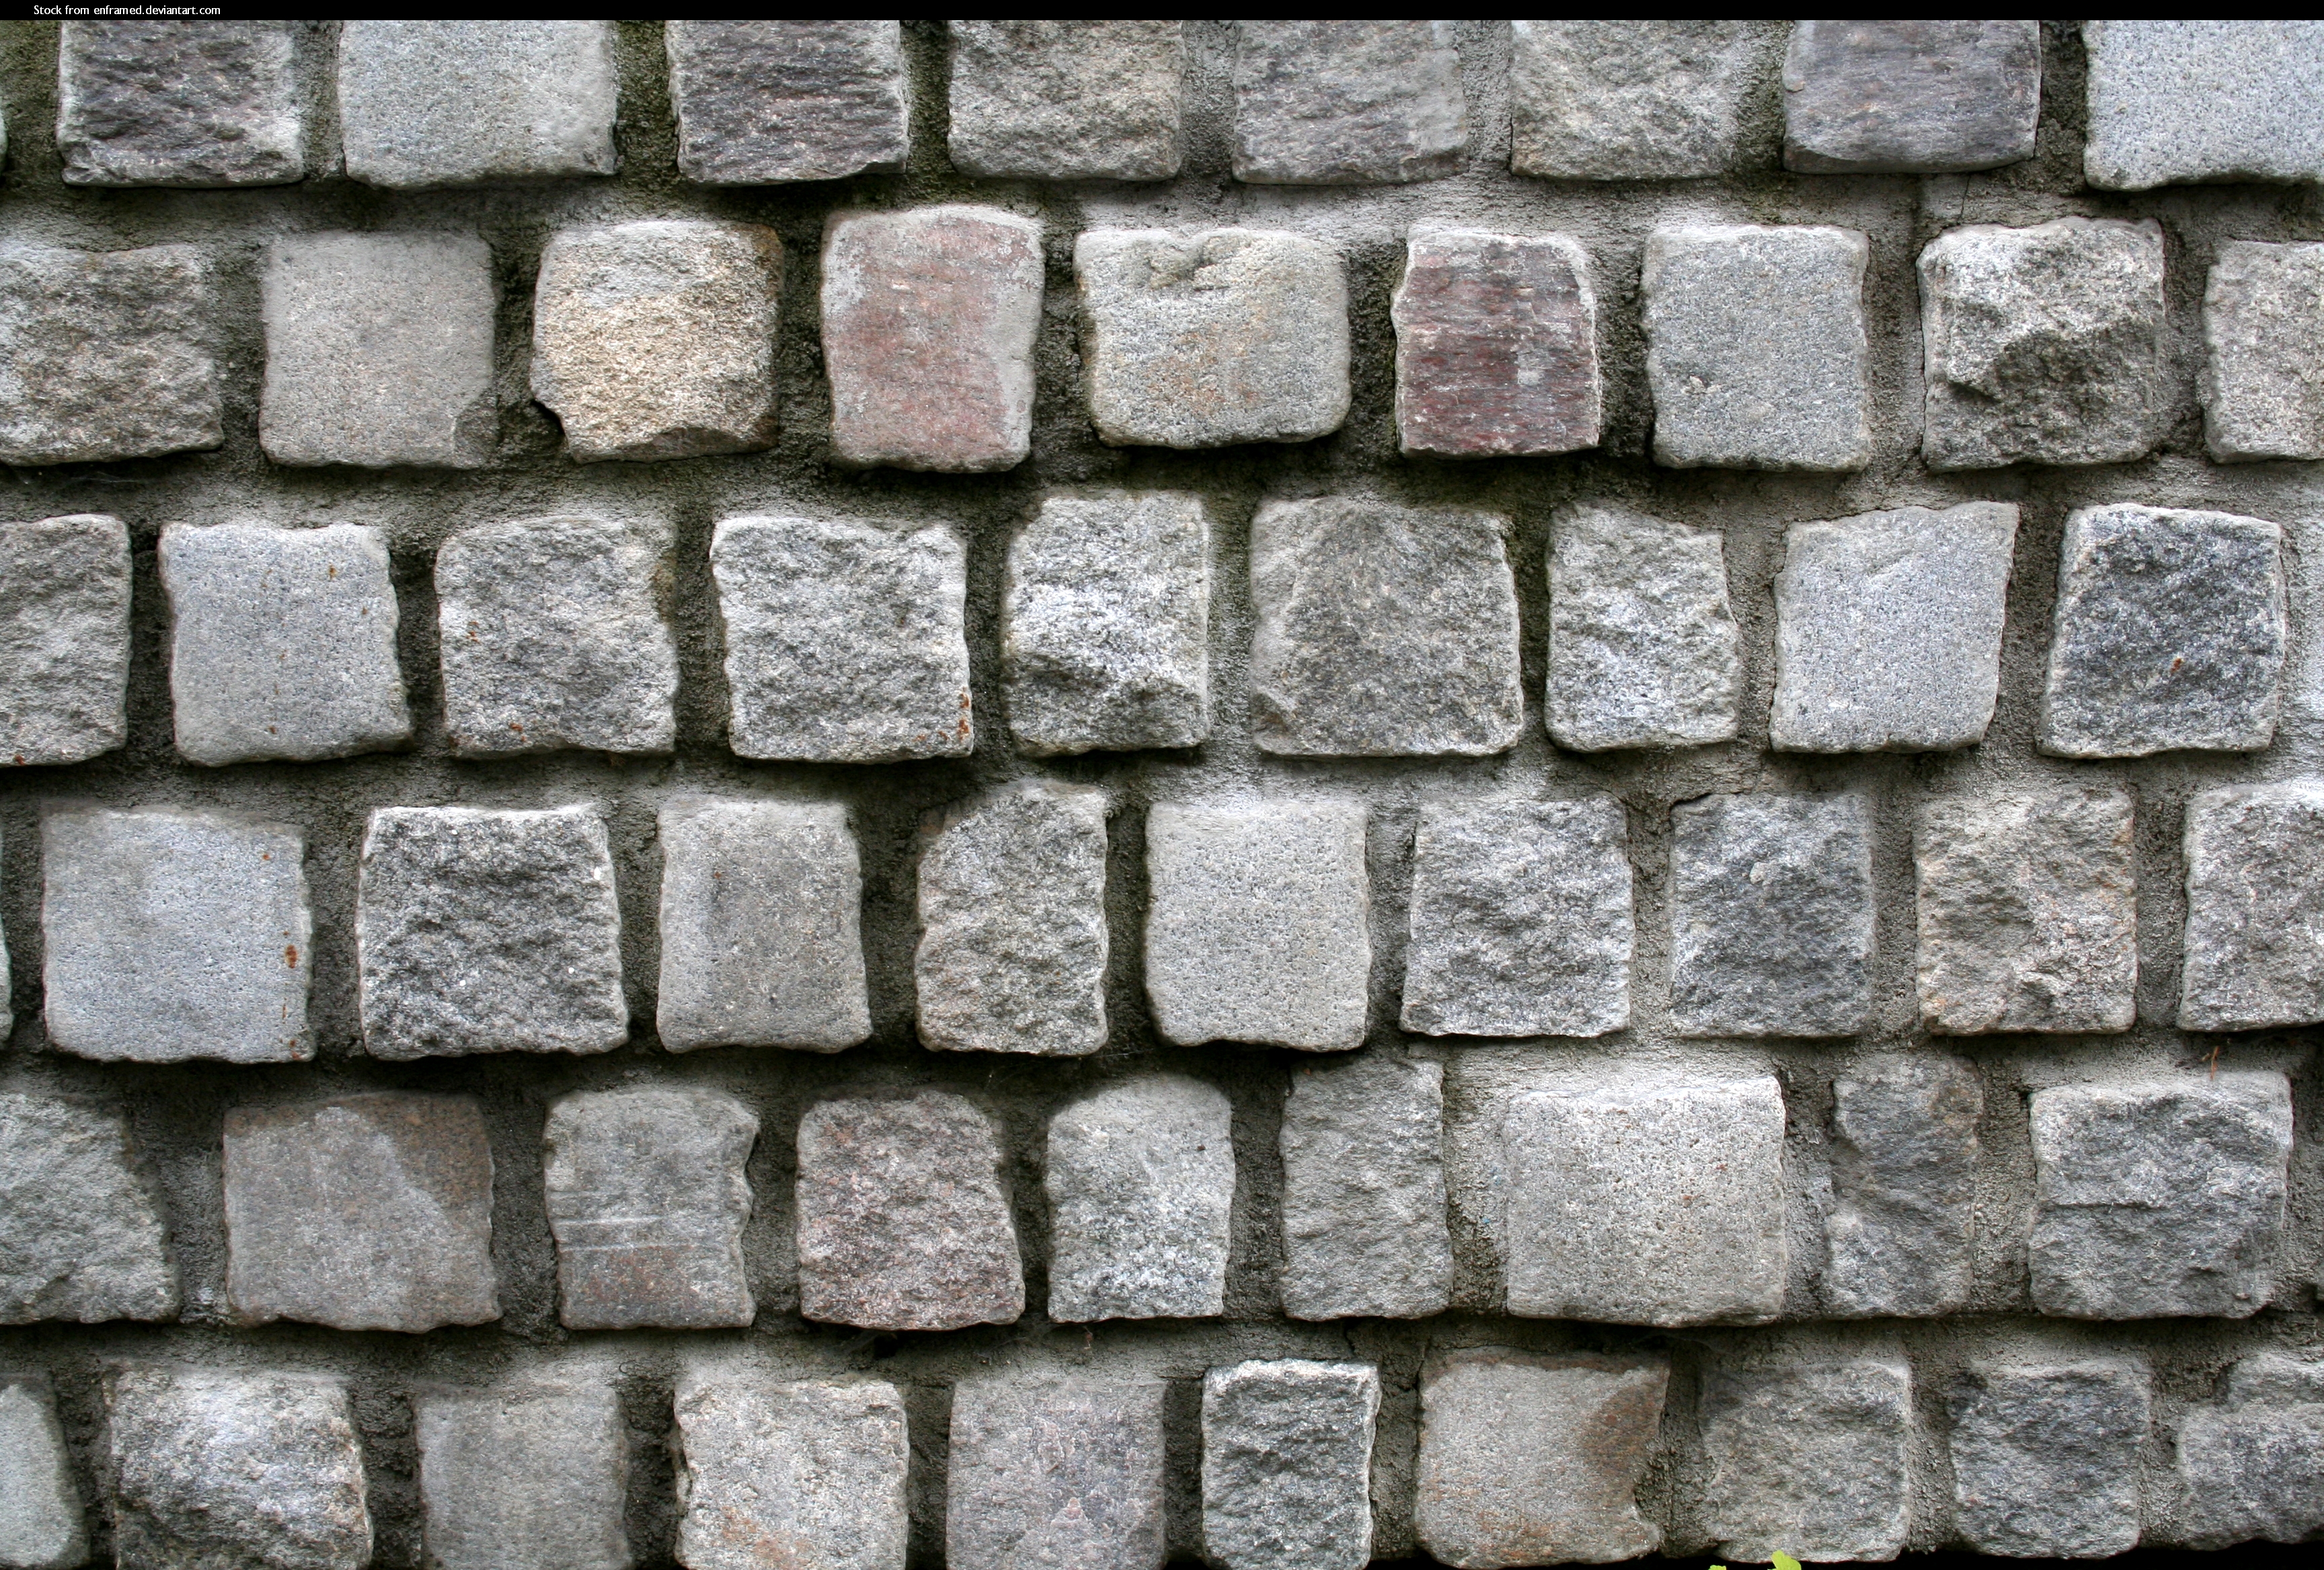 Stone wall texture 2 by enframed on DeviantArt